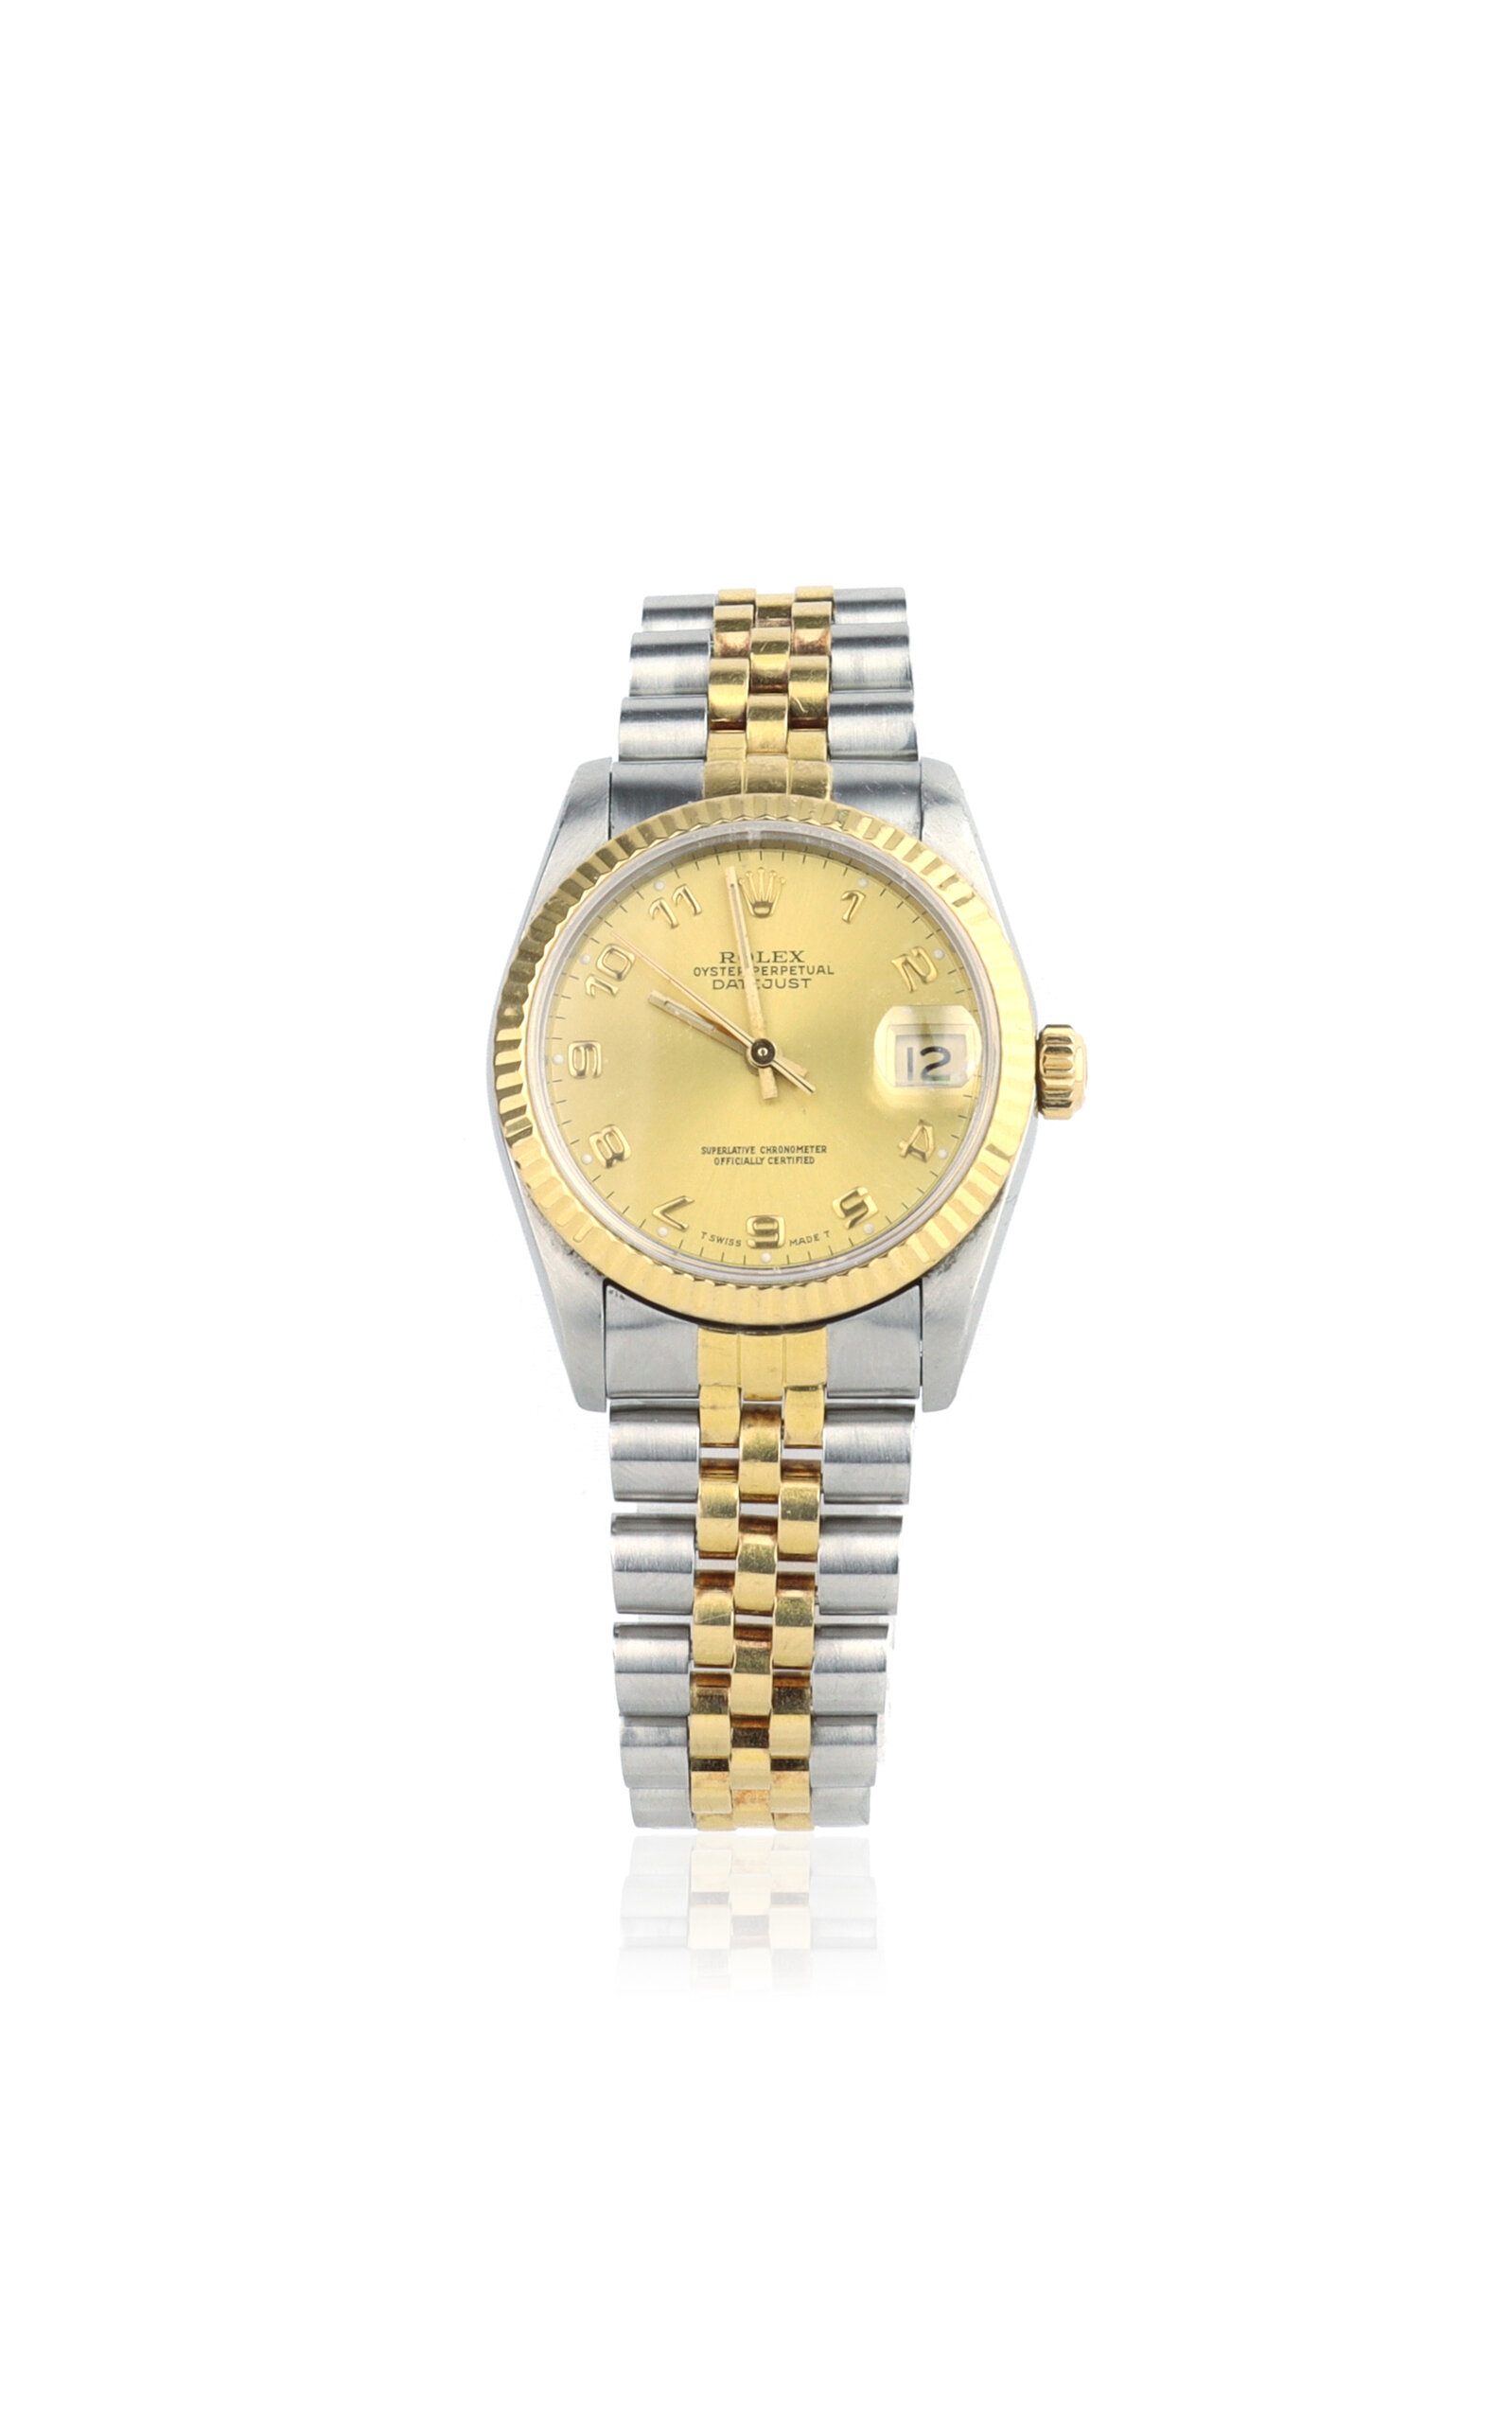 Private Label London Vintage Rolex Datejust Stainless Steel; 18k Yellow Gold Watch